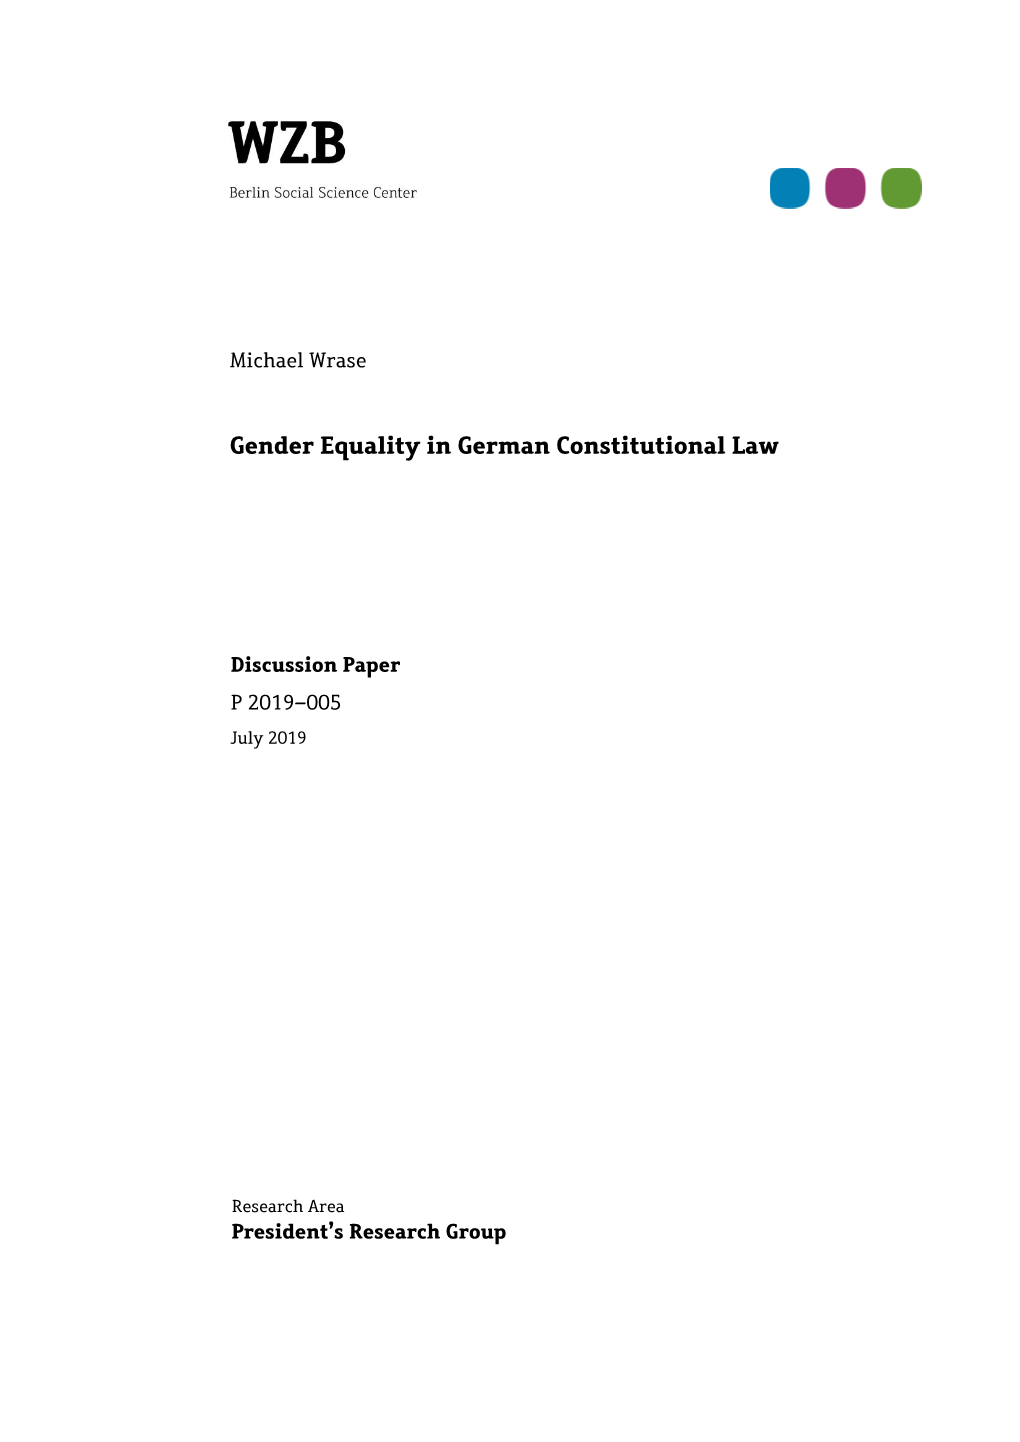 Gender Equality in German Constitutional Law